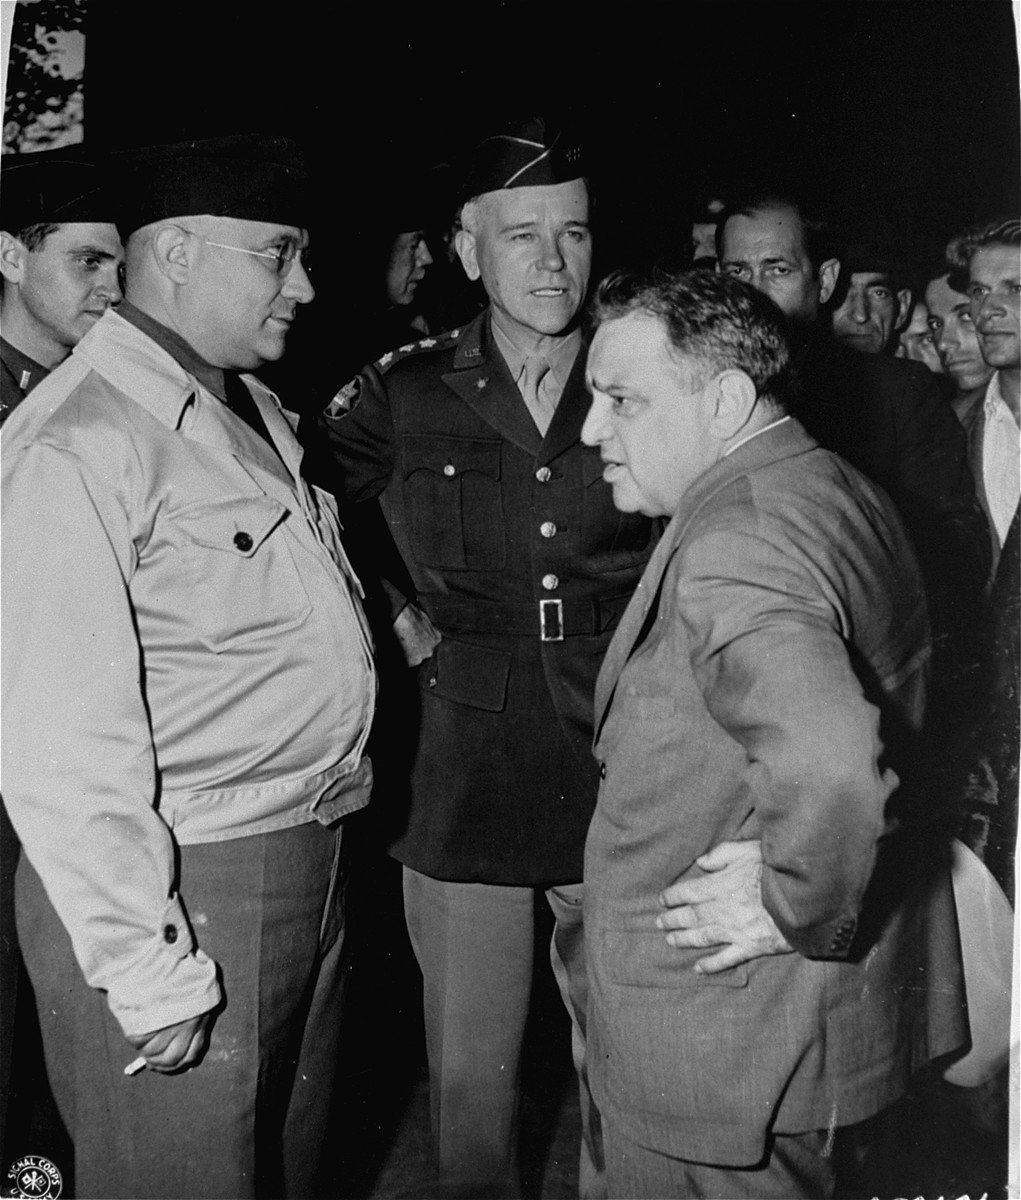 UNRRA Director General Fiorello LaGuardia speaks to General J. Lawton Collins (center) and UNRRA Schlachtensee camp director Harold Fishbein (left) during an official tour of the Schlachtensee displaced persons camp.

Also pictured in partially obscured on the left is Rabbi Mayer Abramowitz.